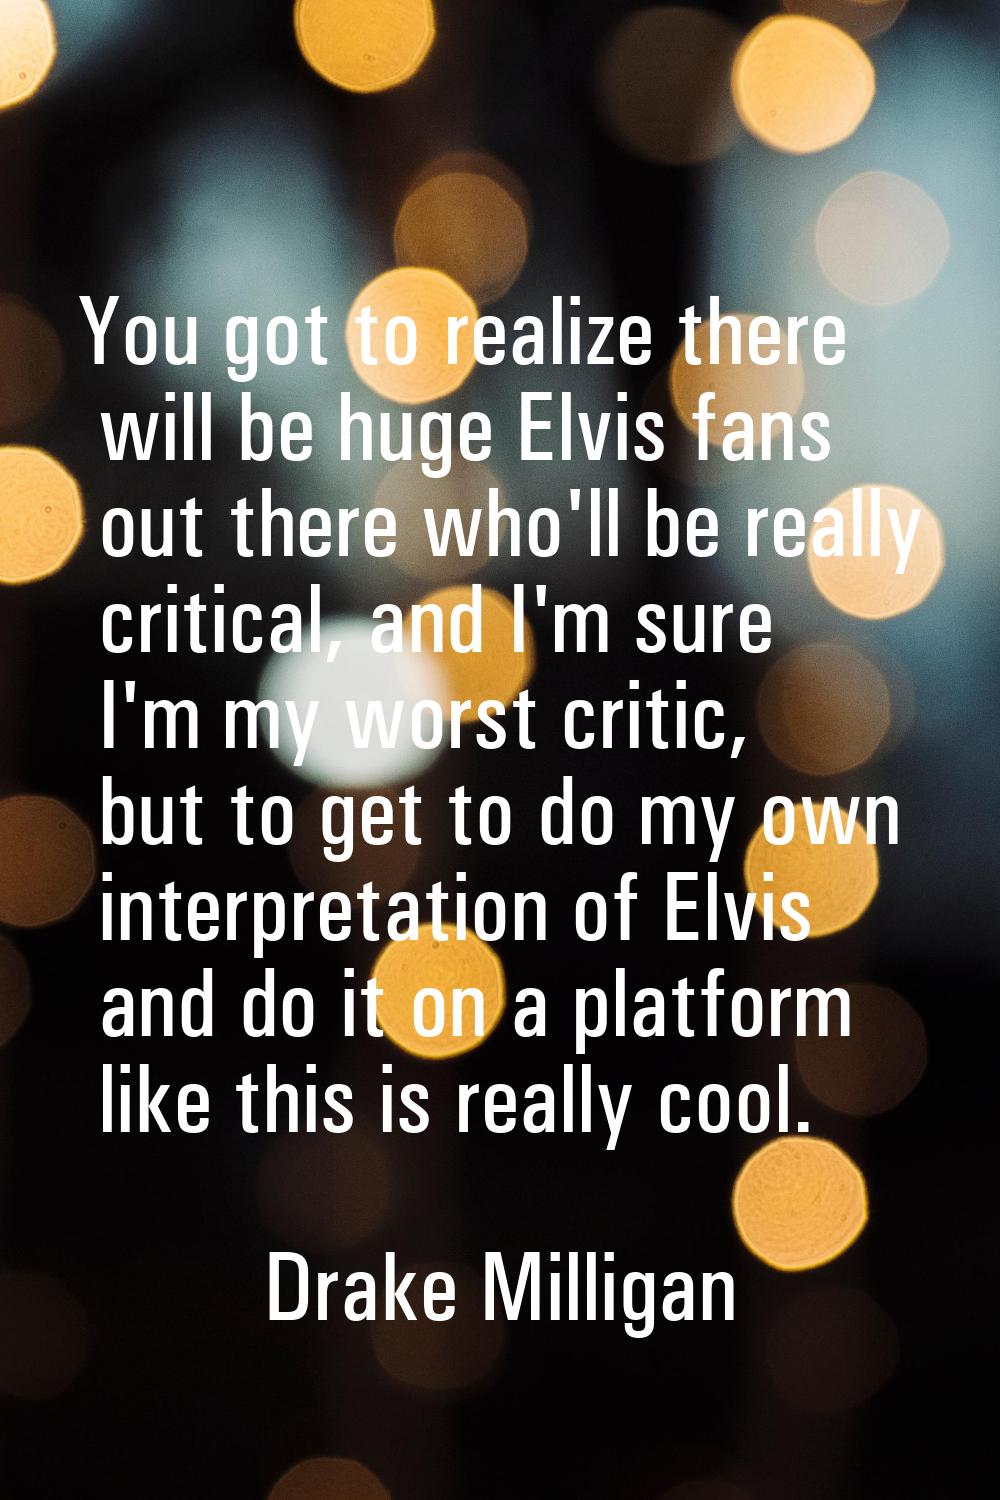 You got to realize there will be huge Elvis fans out there who'll be really critical, and I'm sure 